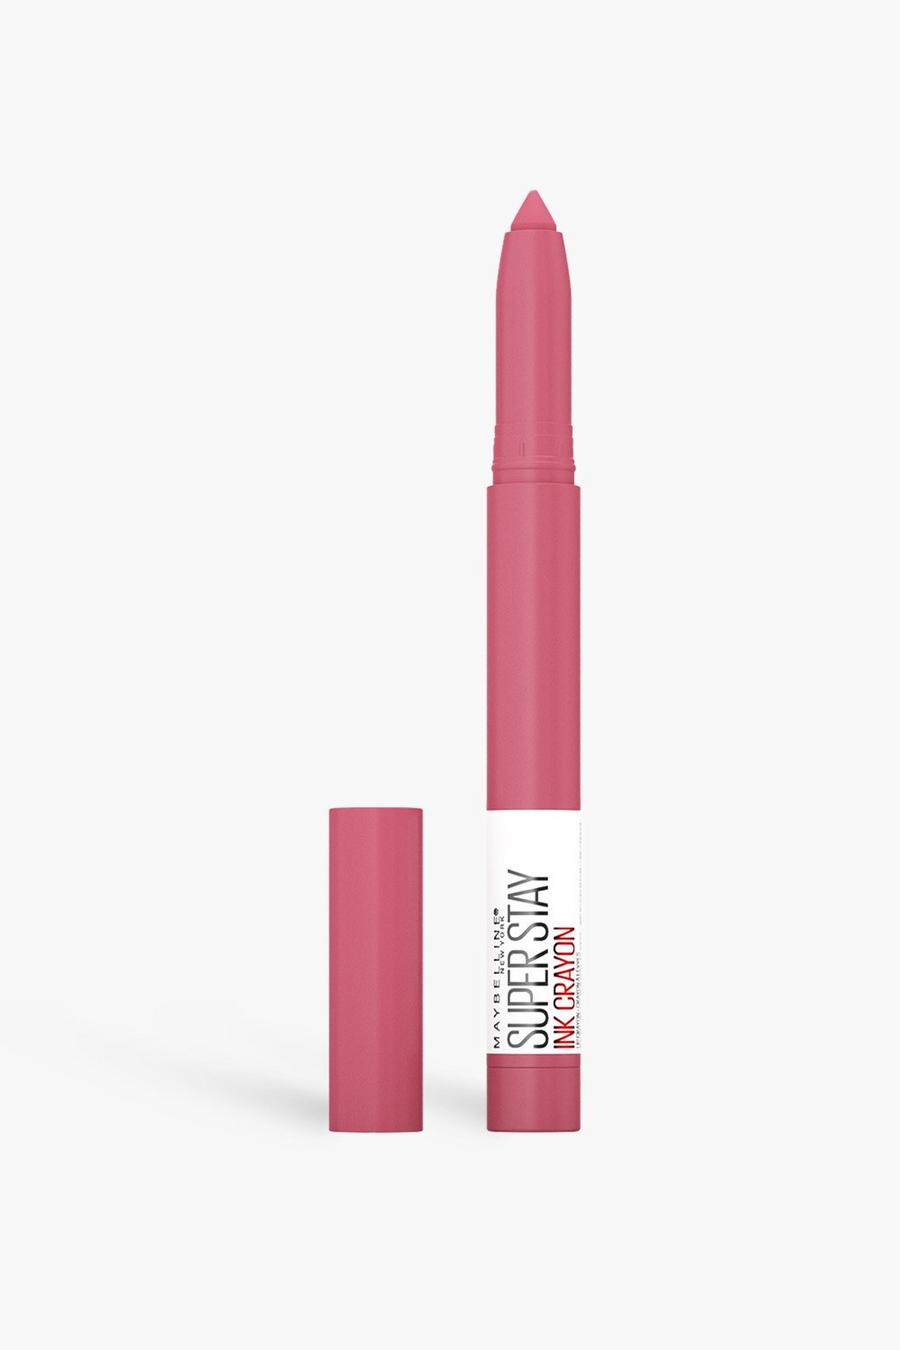 Maybelline Superstay Crayon - Keep It Fun image number 1